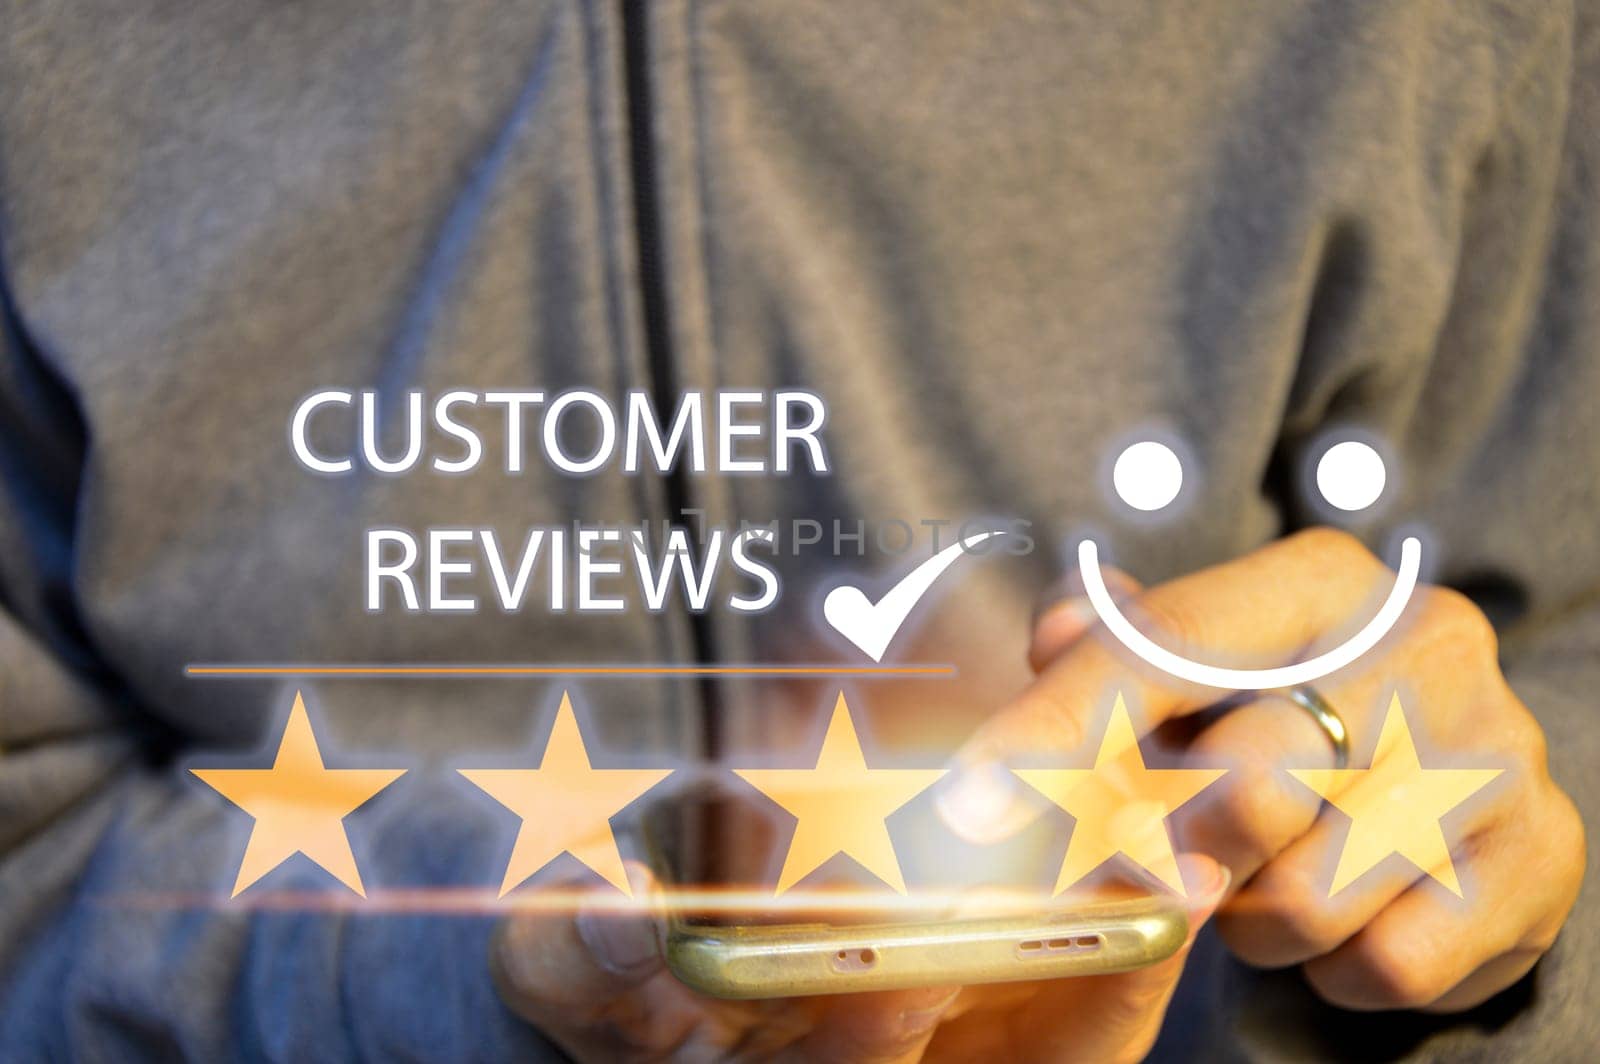 Customers rate service of Businessmen choose to rate 5 stars using smart phone and give five star symbol. Excellent rating. User give rating, feedback, good business network score by boonruen